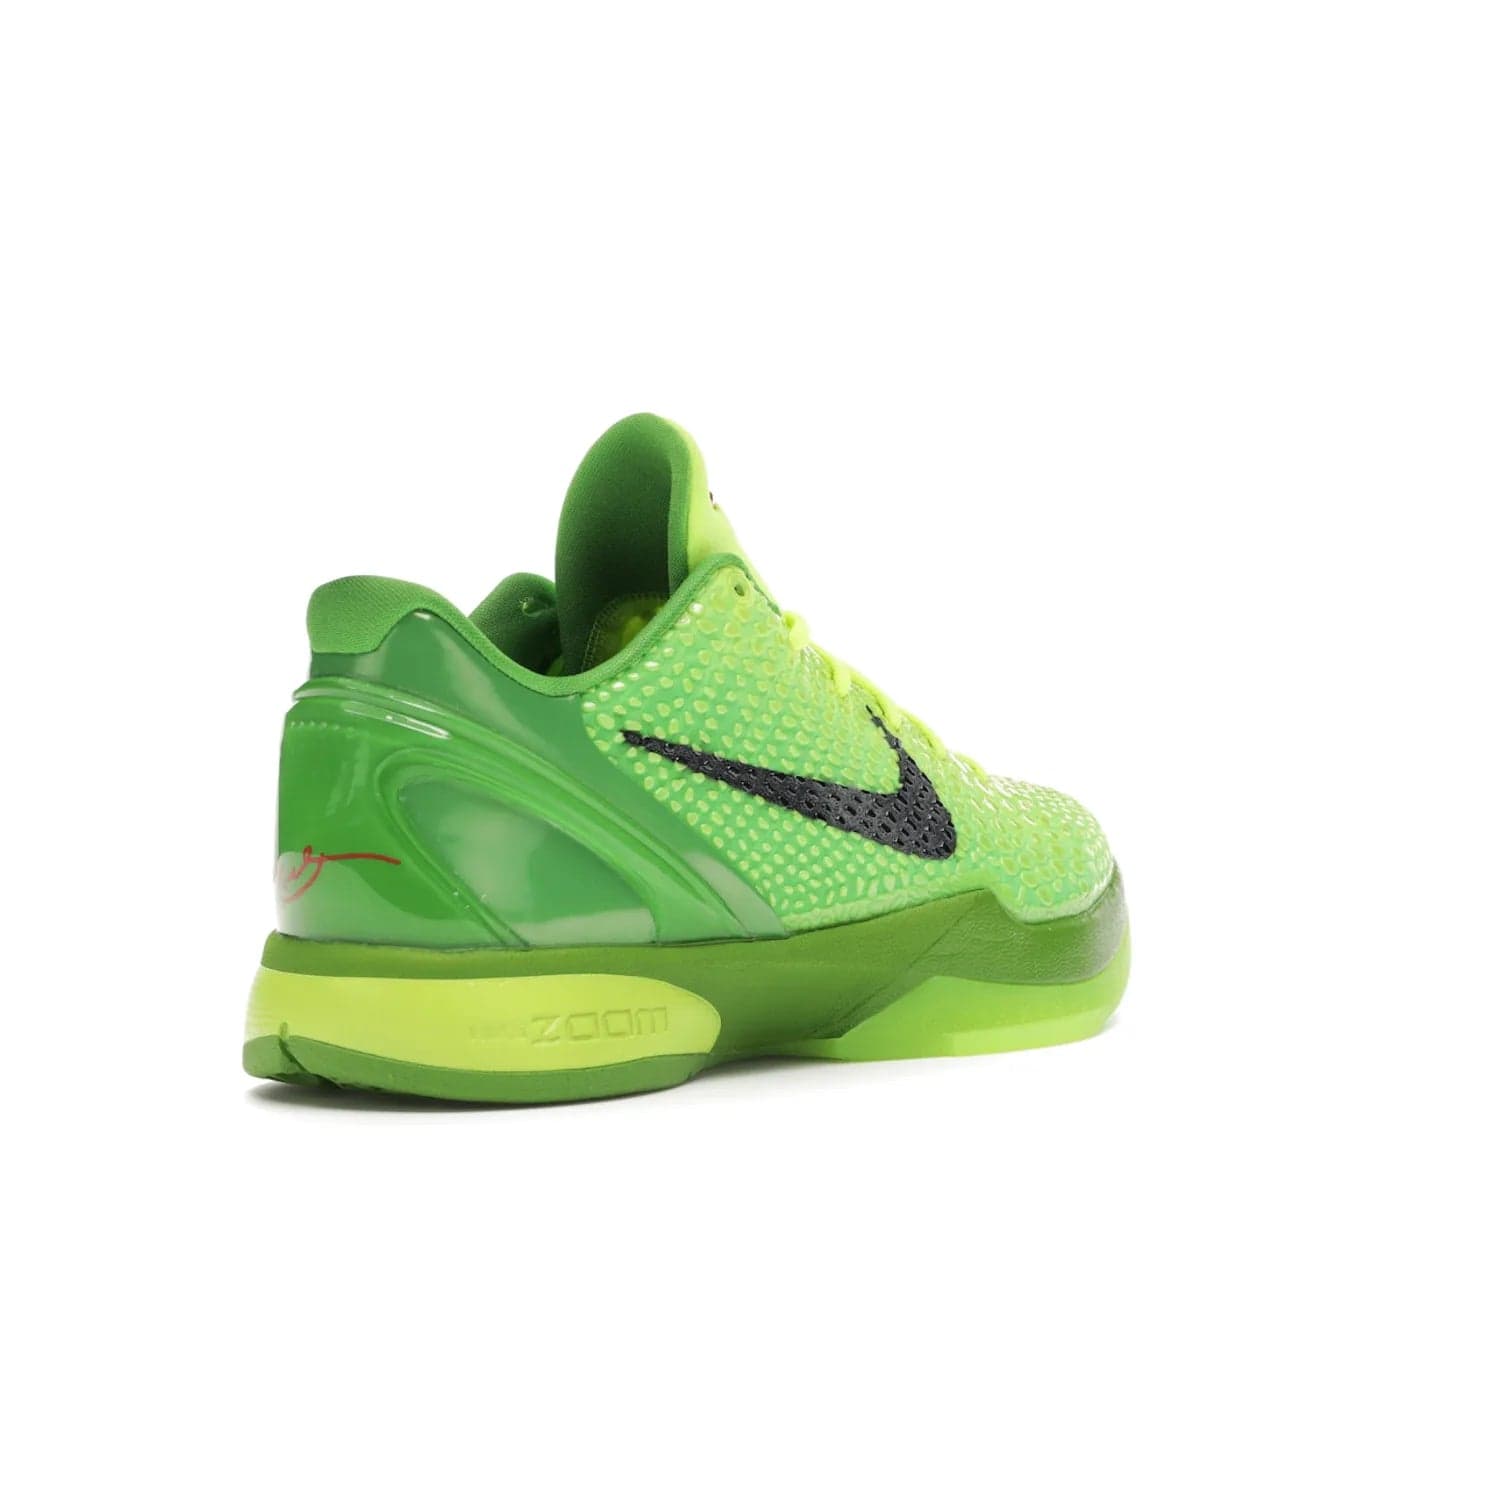 Nike Kobe 6 Protro Grinch (2020) - Image 32 - Only at www.BallersClubKickz.com - #
The Nike Kobe 6 Protro Grinch updates the iconic 2011 design with modern tech like a Zoom Air cushioning system, scaled-down traction, and updated silhouette. Experience the textured Green Apple and Volt upper plus bright red and green accents for $180.